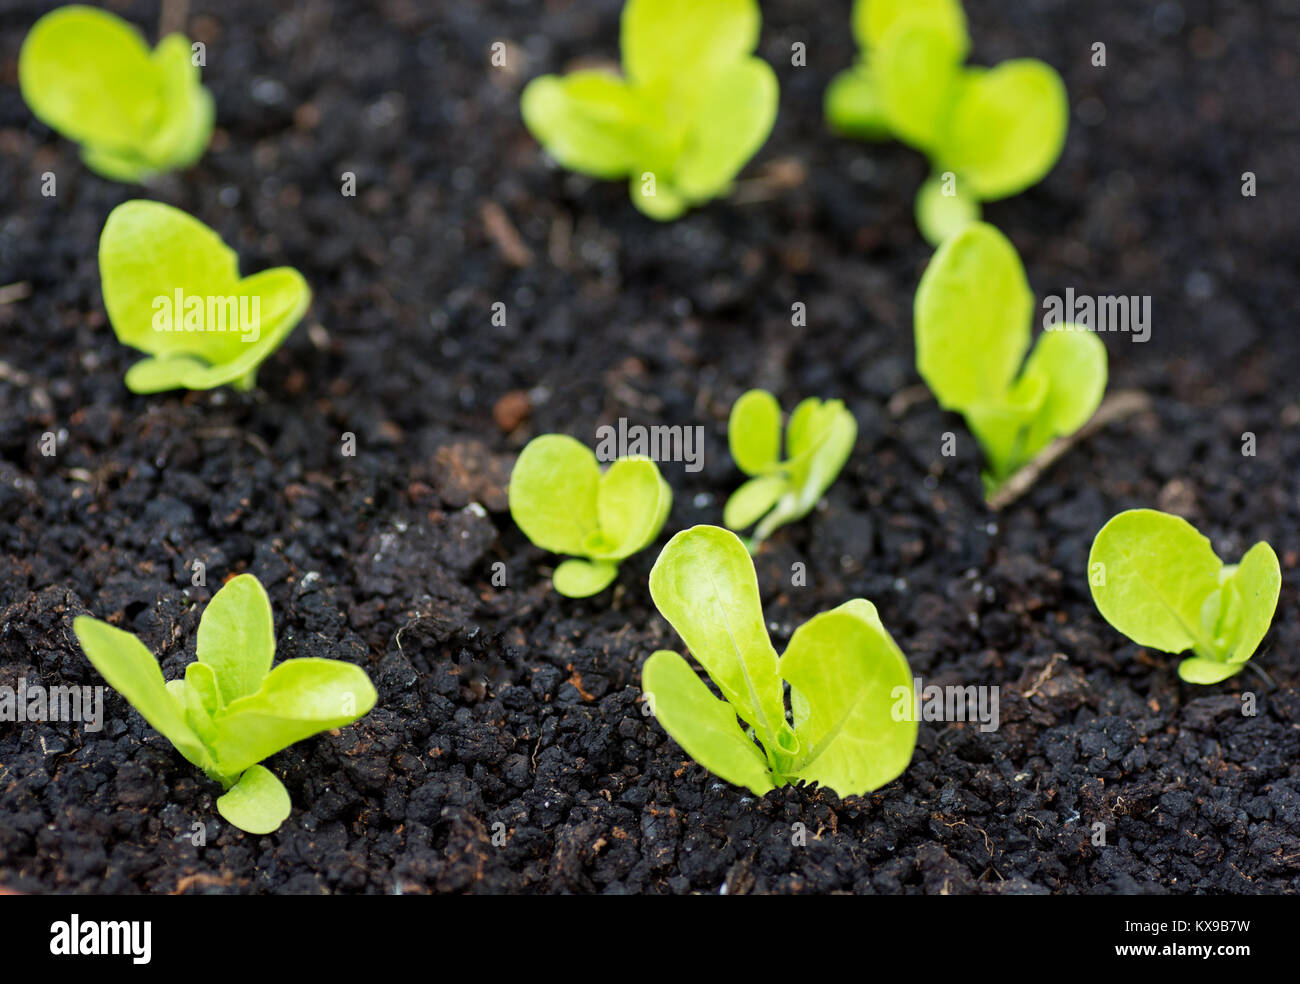 Organic garden with irrigation and small lettuce plants Stock Photo